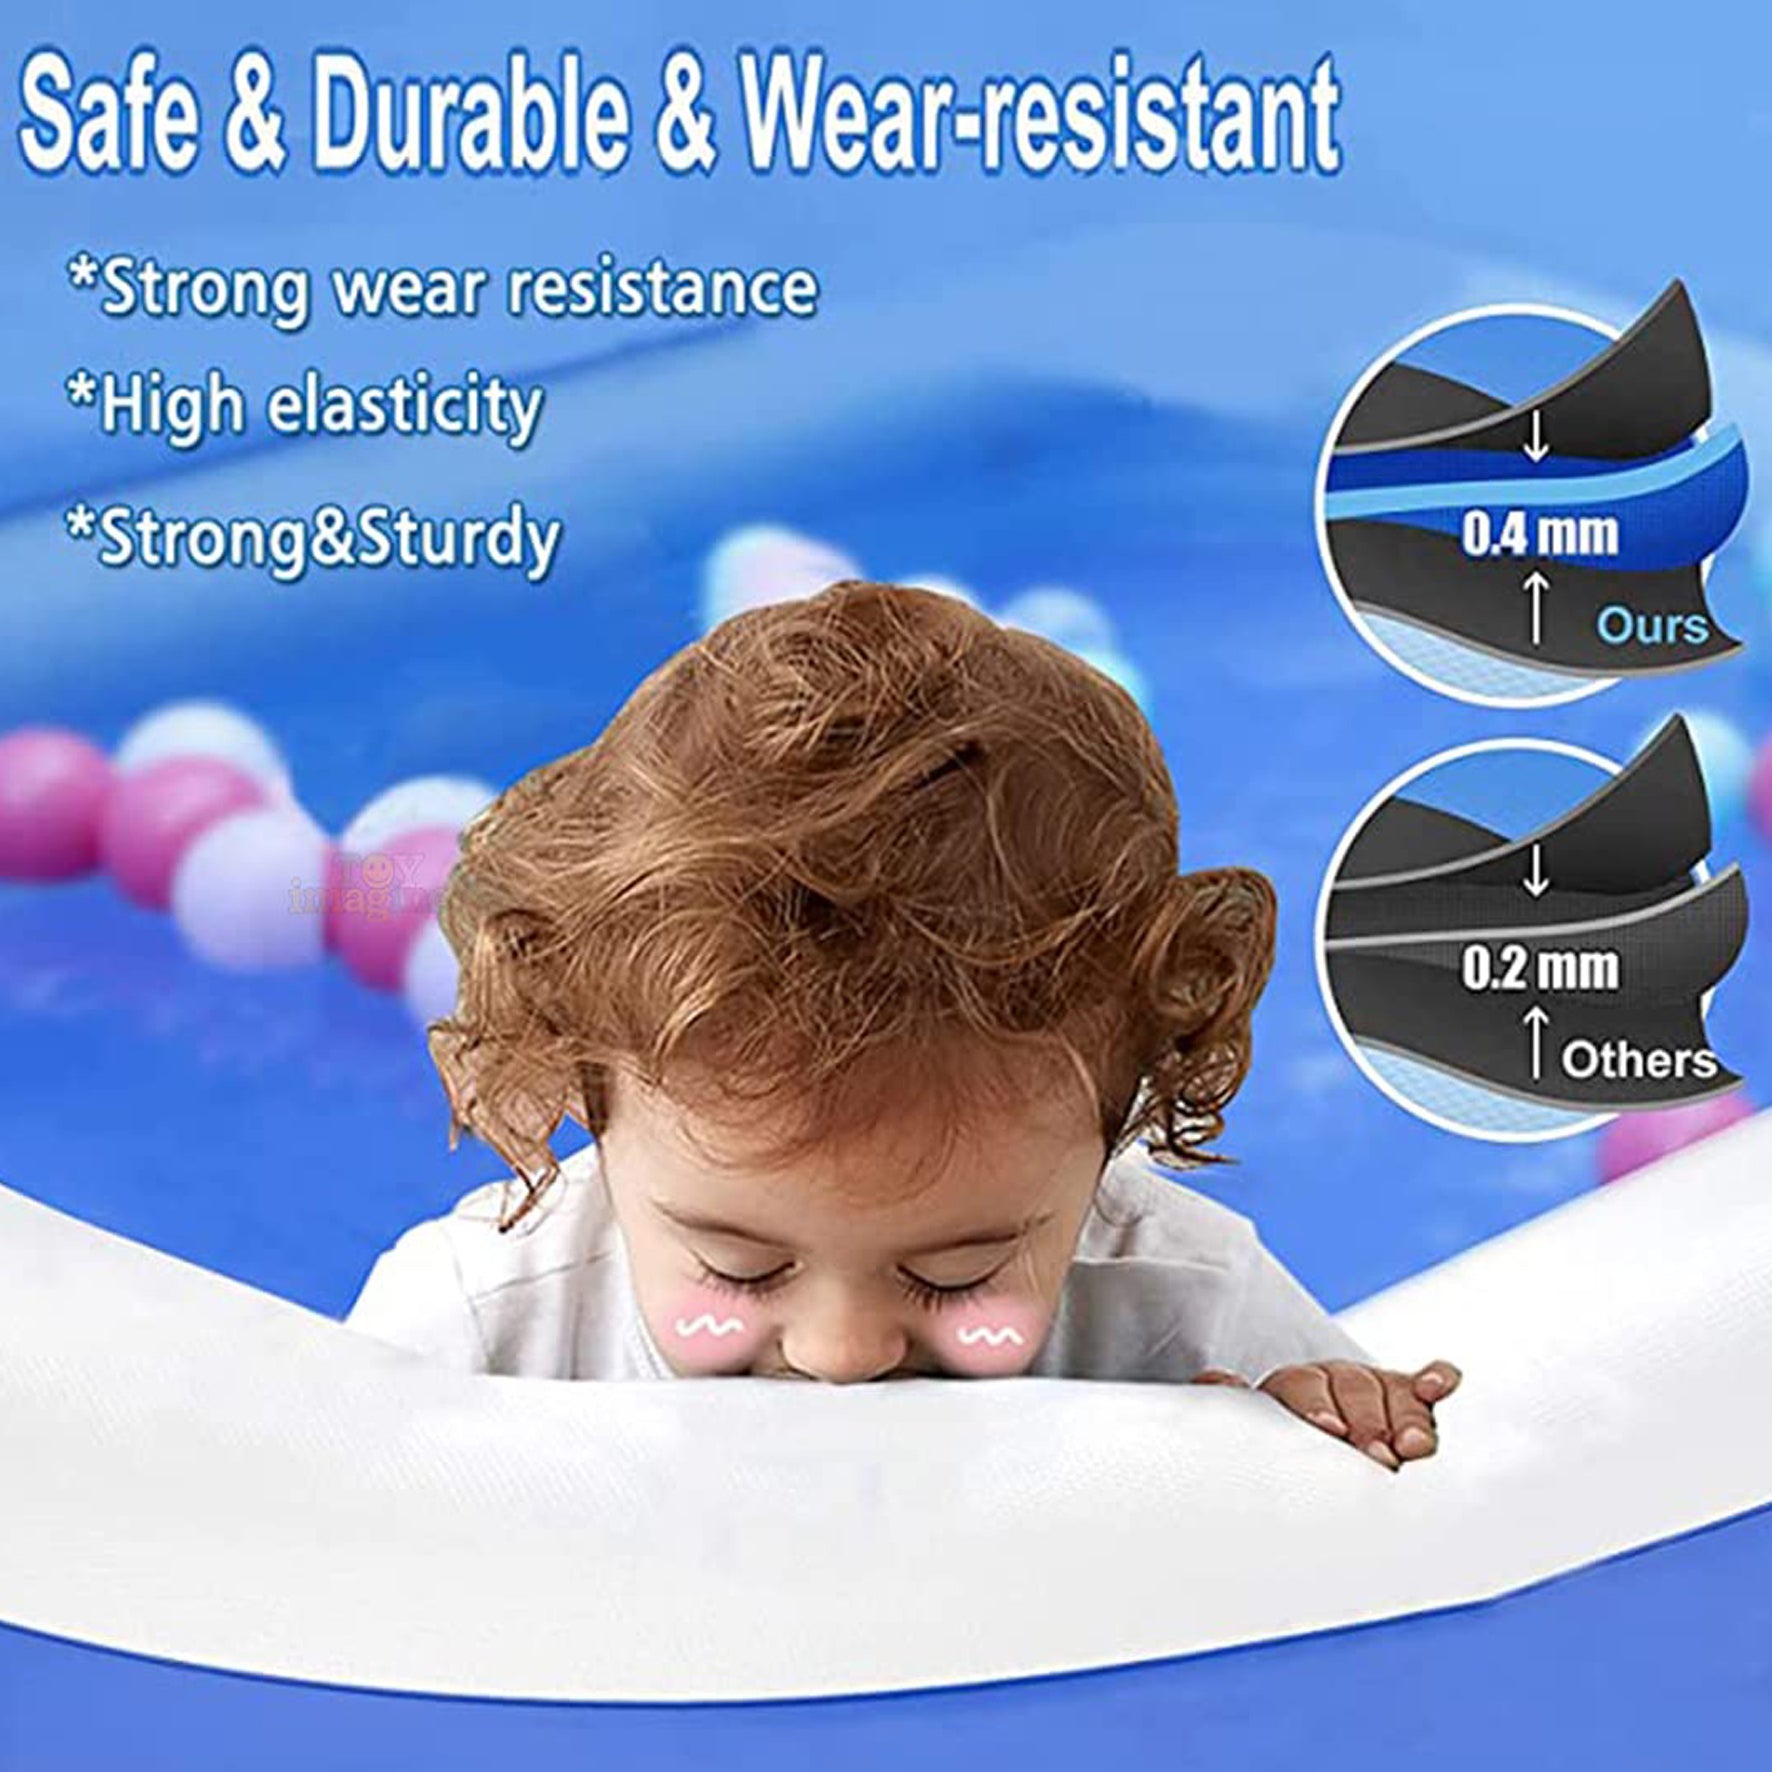 Portable,Inflatable & Foldable Kids Swimming Pool with Air Pump,Baby Bath Tub,Water Pool for Kids and Adults,Outdoor&Indoor Kids Bathing Tub